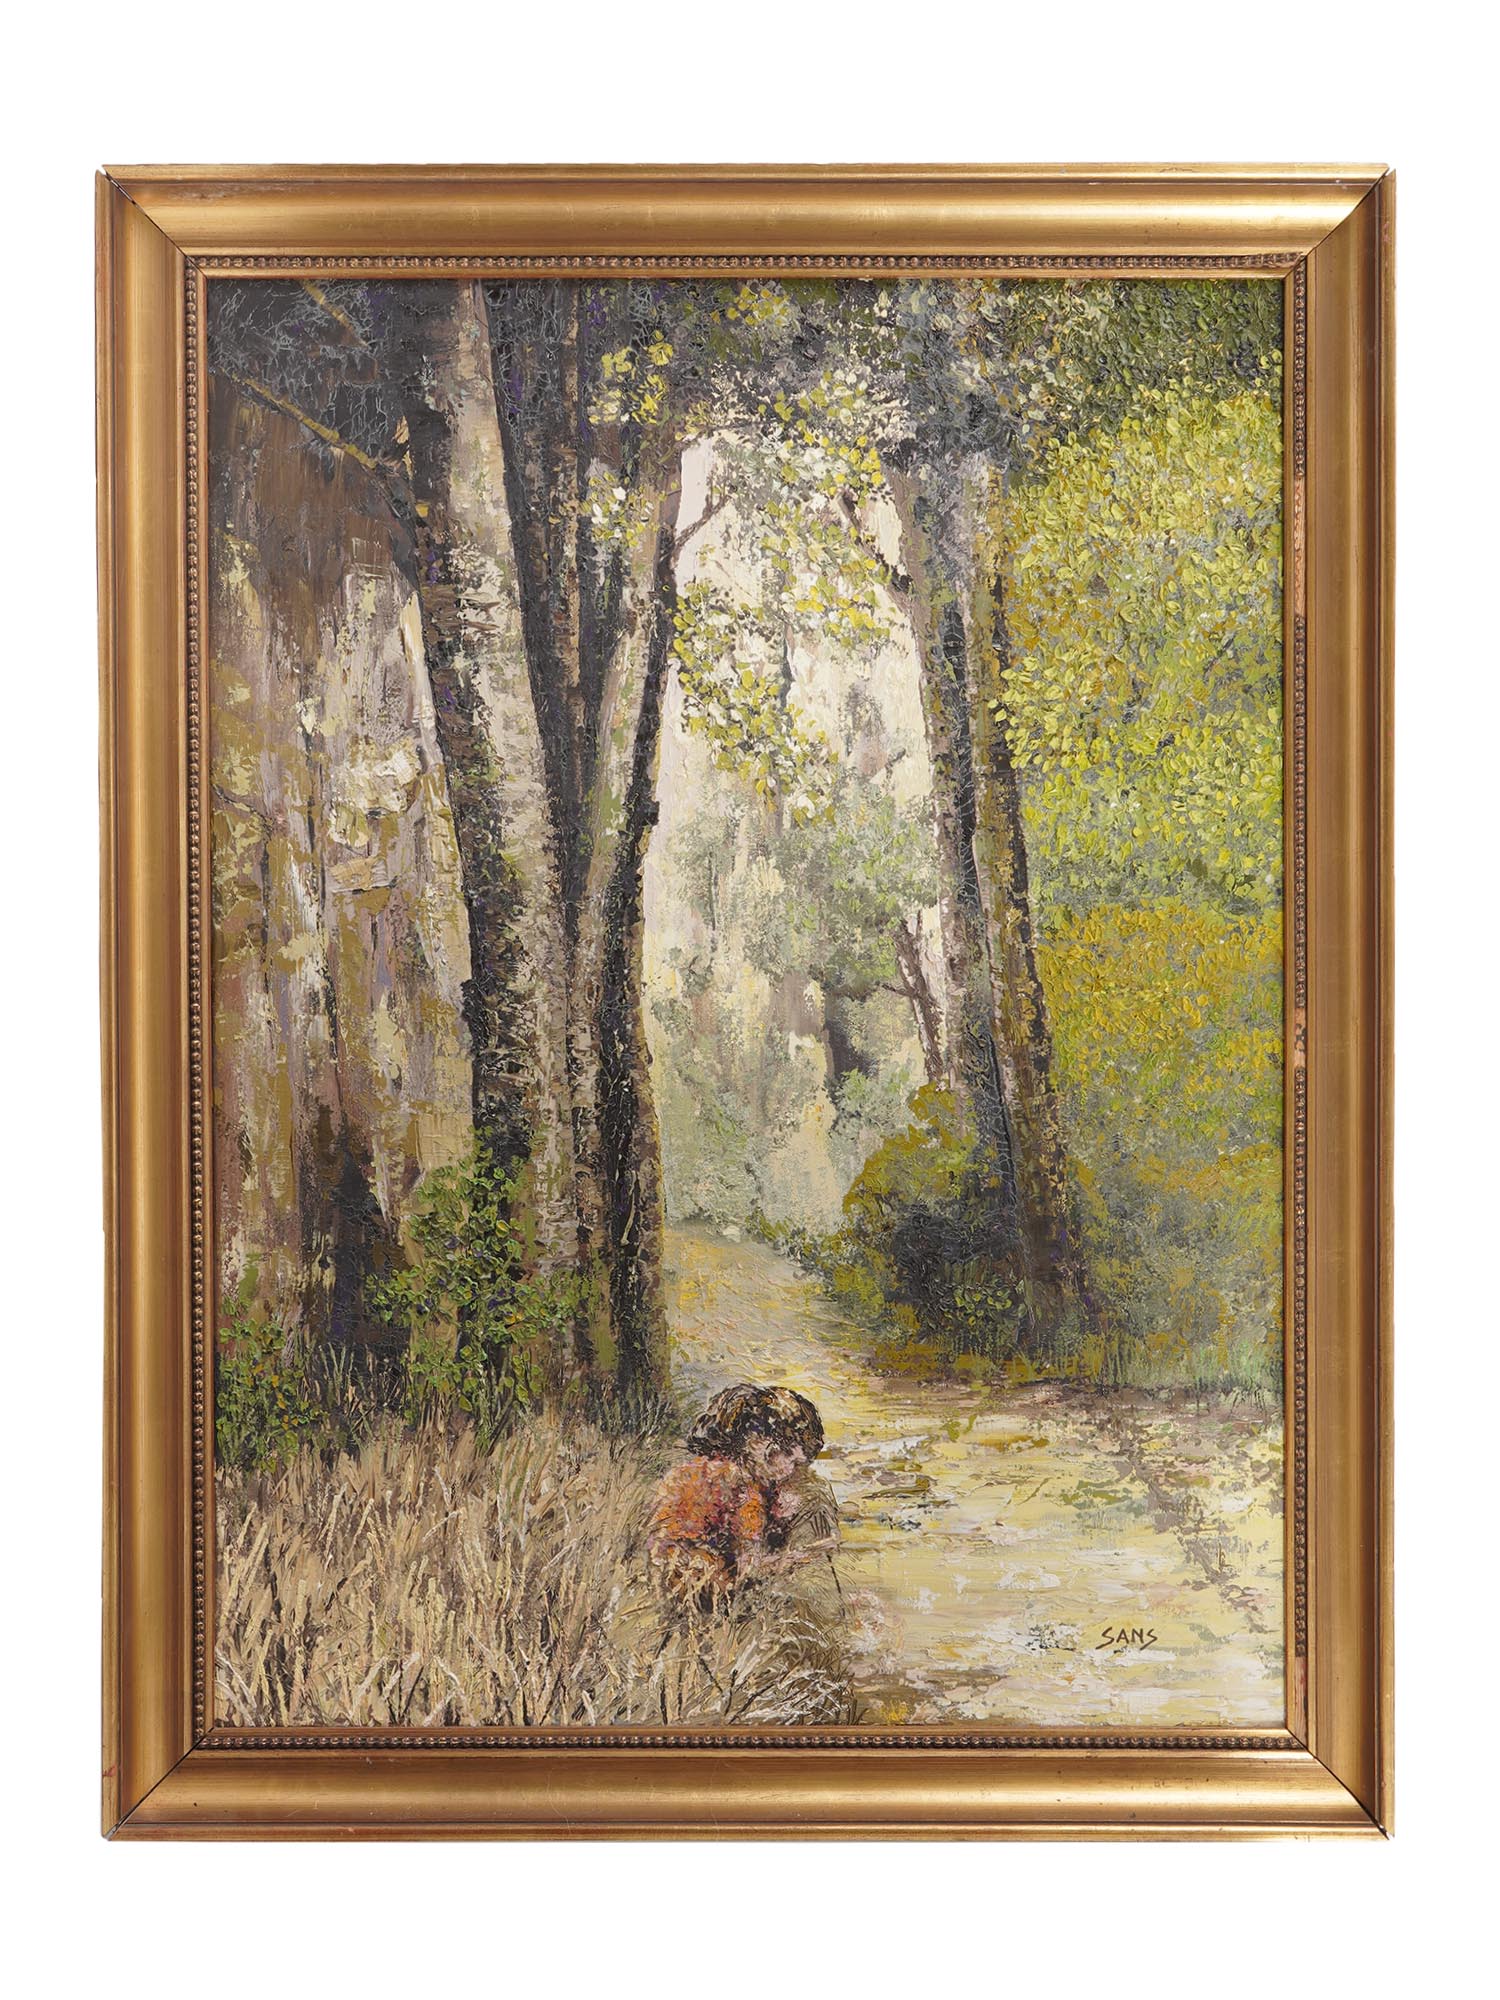 OIL PAINTING GIRL IN THE WOODS SIGNED PETER SANS PIC-0